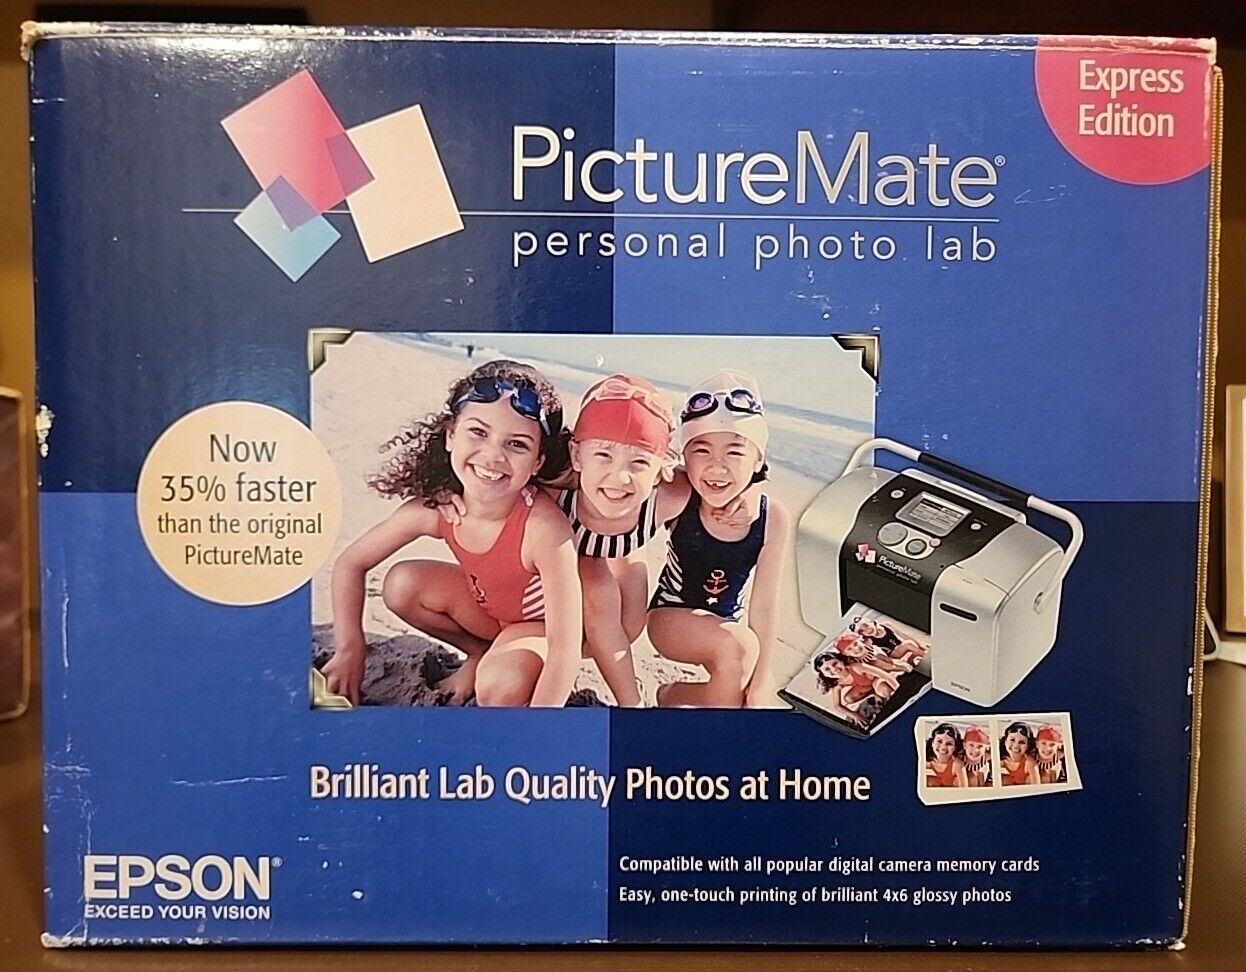 NEW Epson PictureMate Express Edition Digital Personal Photo Lab Inkjet Printer